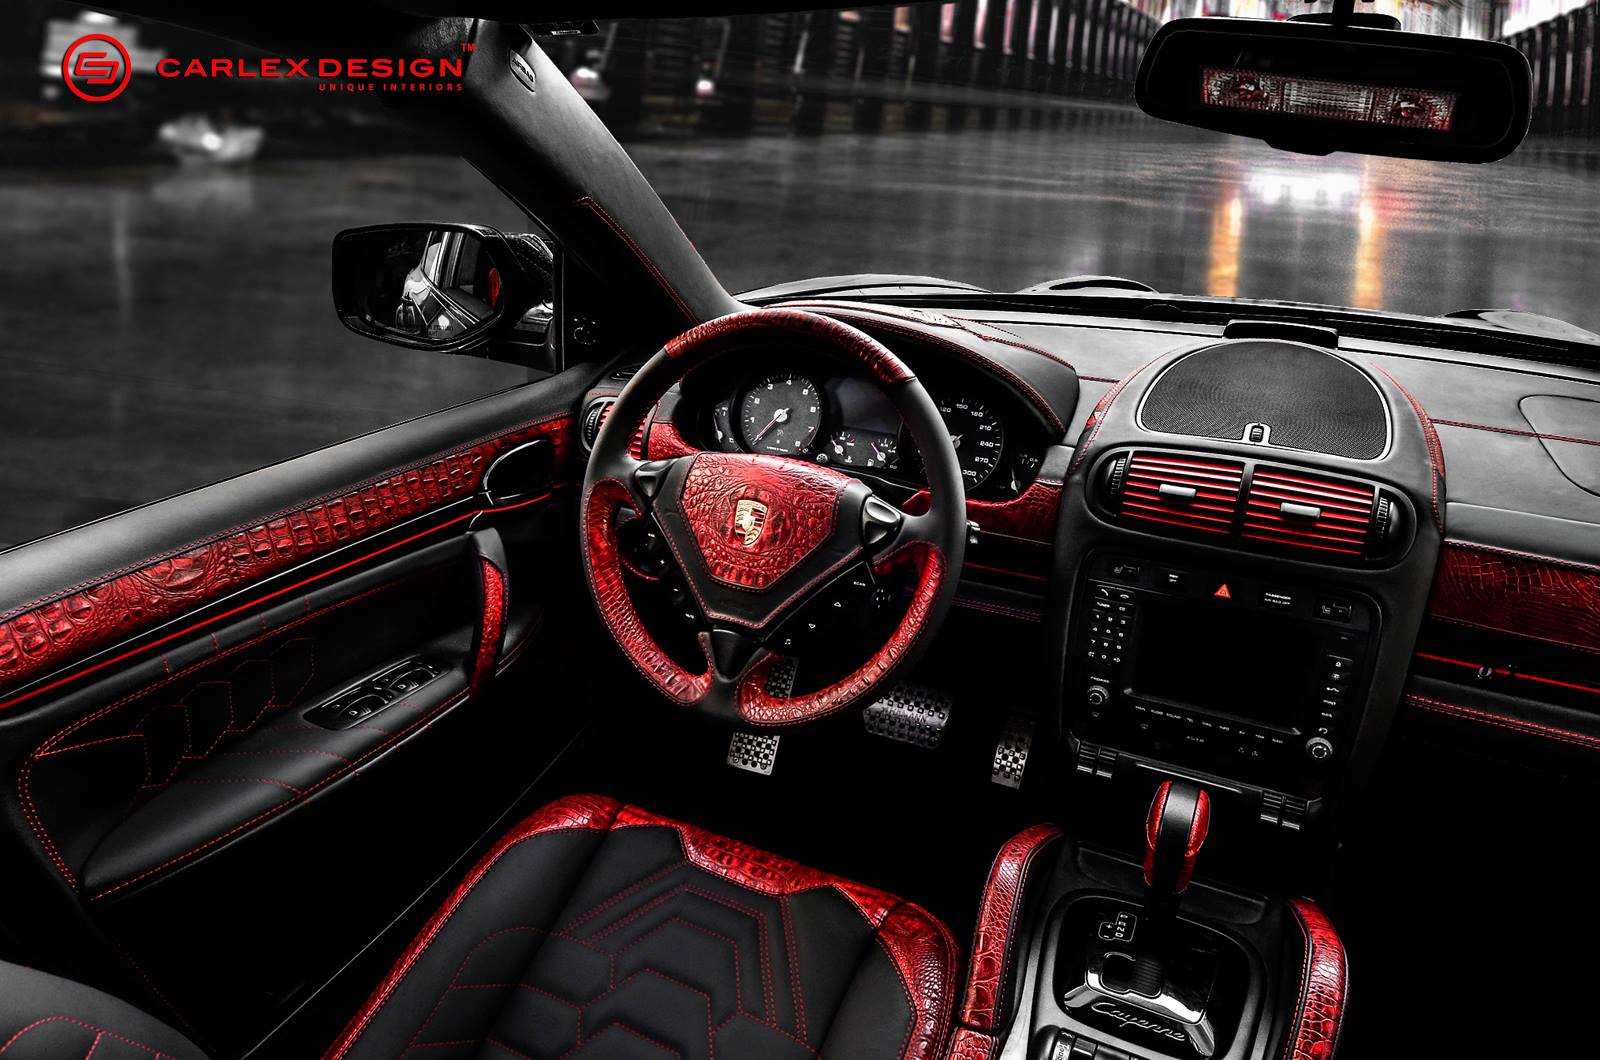 Porsche Cayenne Goes Reptilian With Red Crocodile Leather